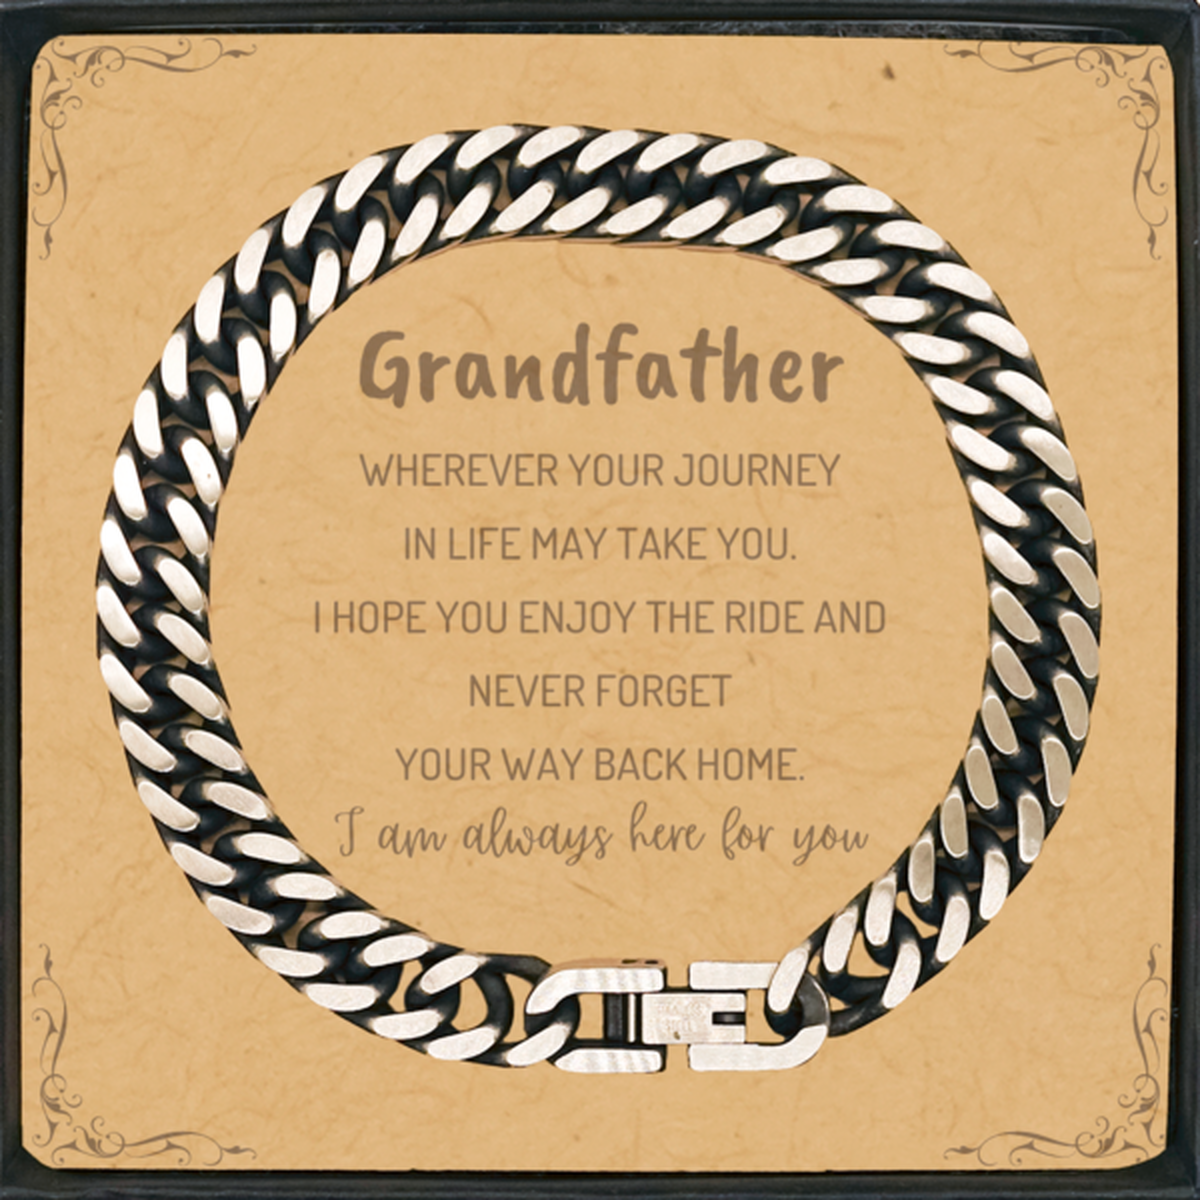 Grandfather wherever your journey in life may take you, I am always here for you Grandfather Cuban Link Chain Bracelet, Awesome Christmas Gifts For Grandfather Message Card, Grandfather Birthday Gifts for Men Women Family Loved One